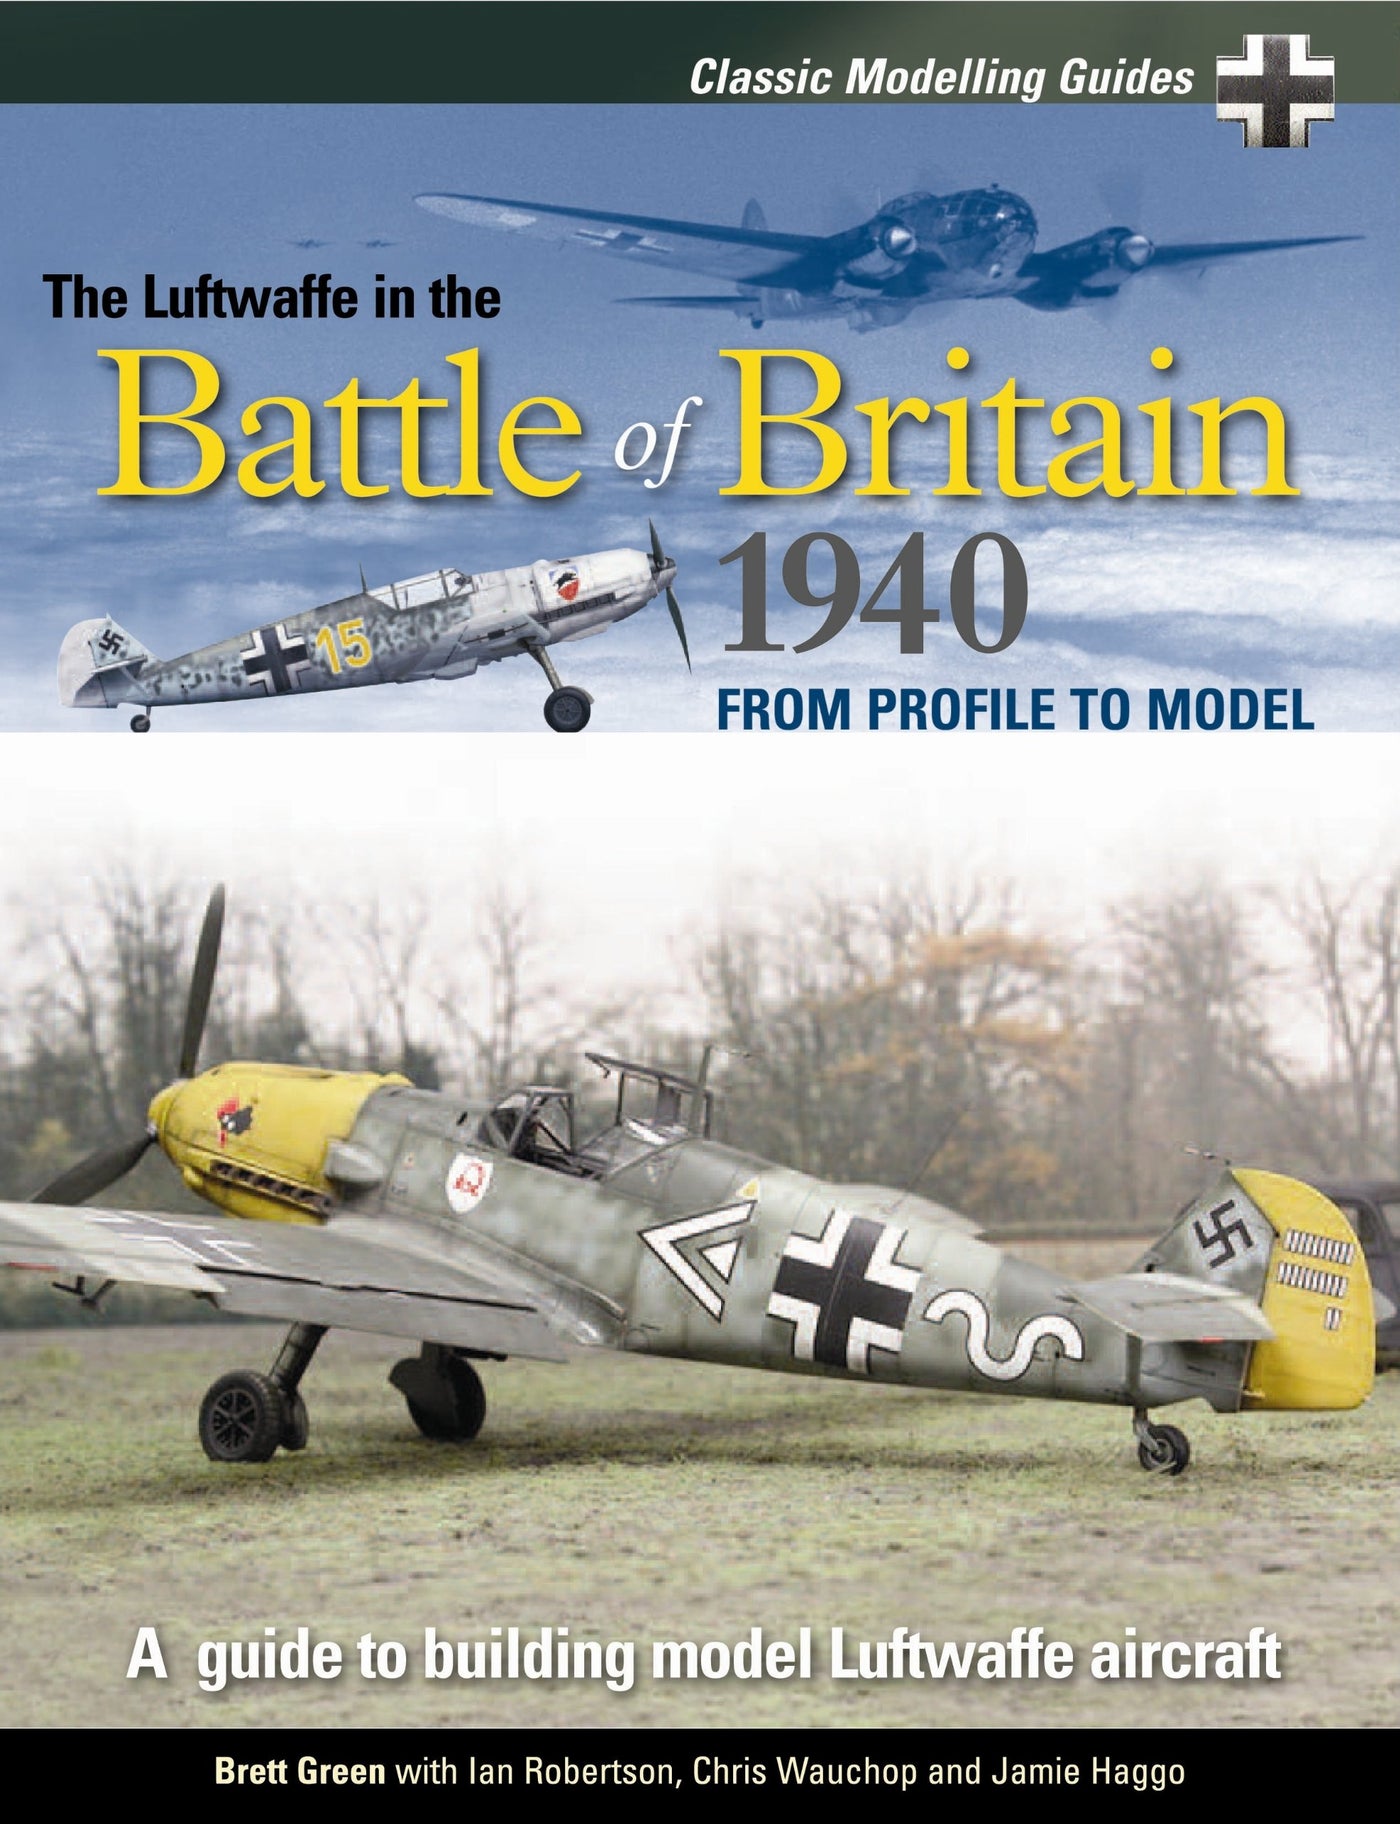 Classic Modelling Guide 1:  The Luftwaffe in The Battle of Britain 1940